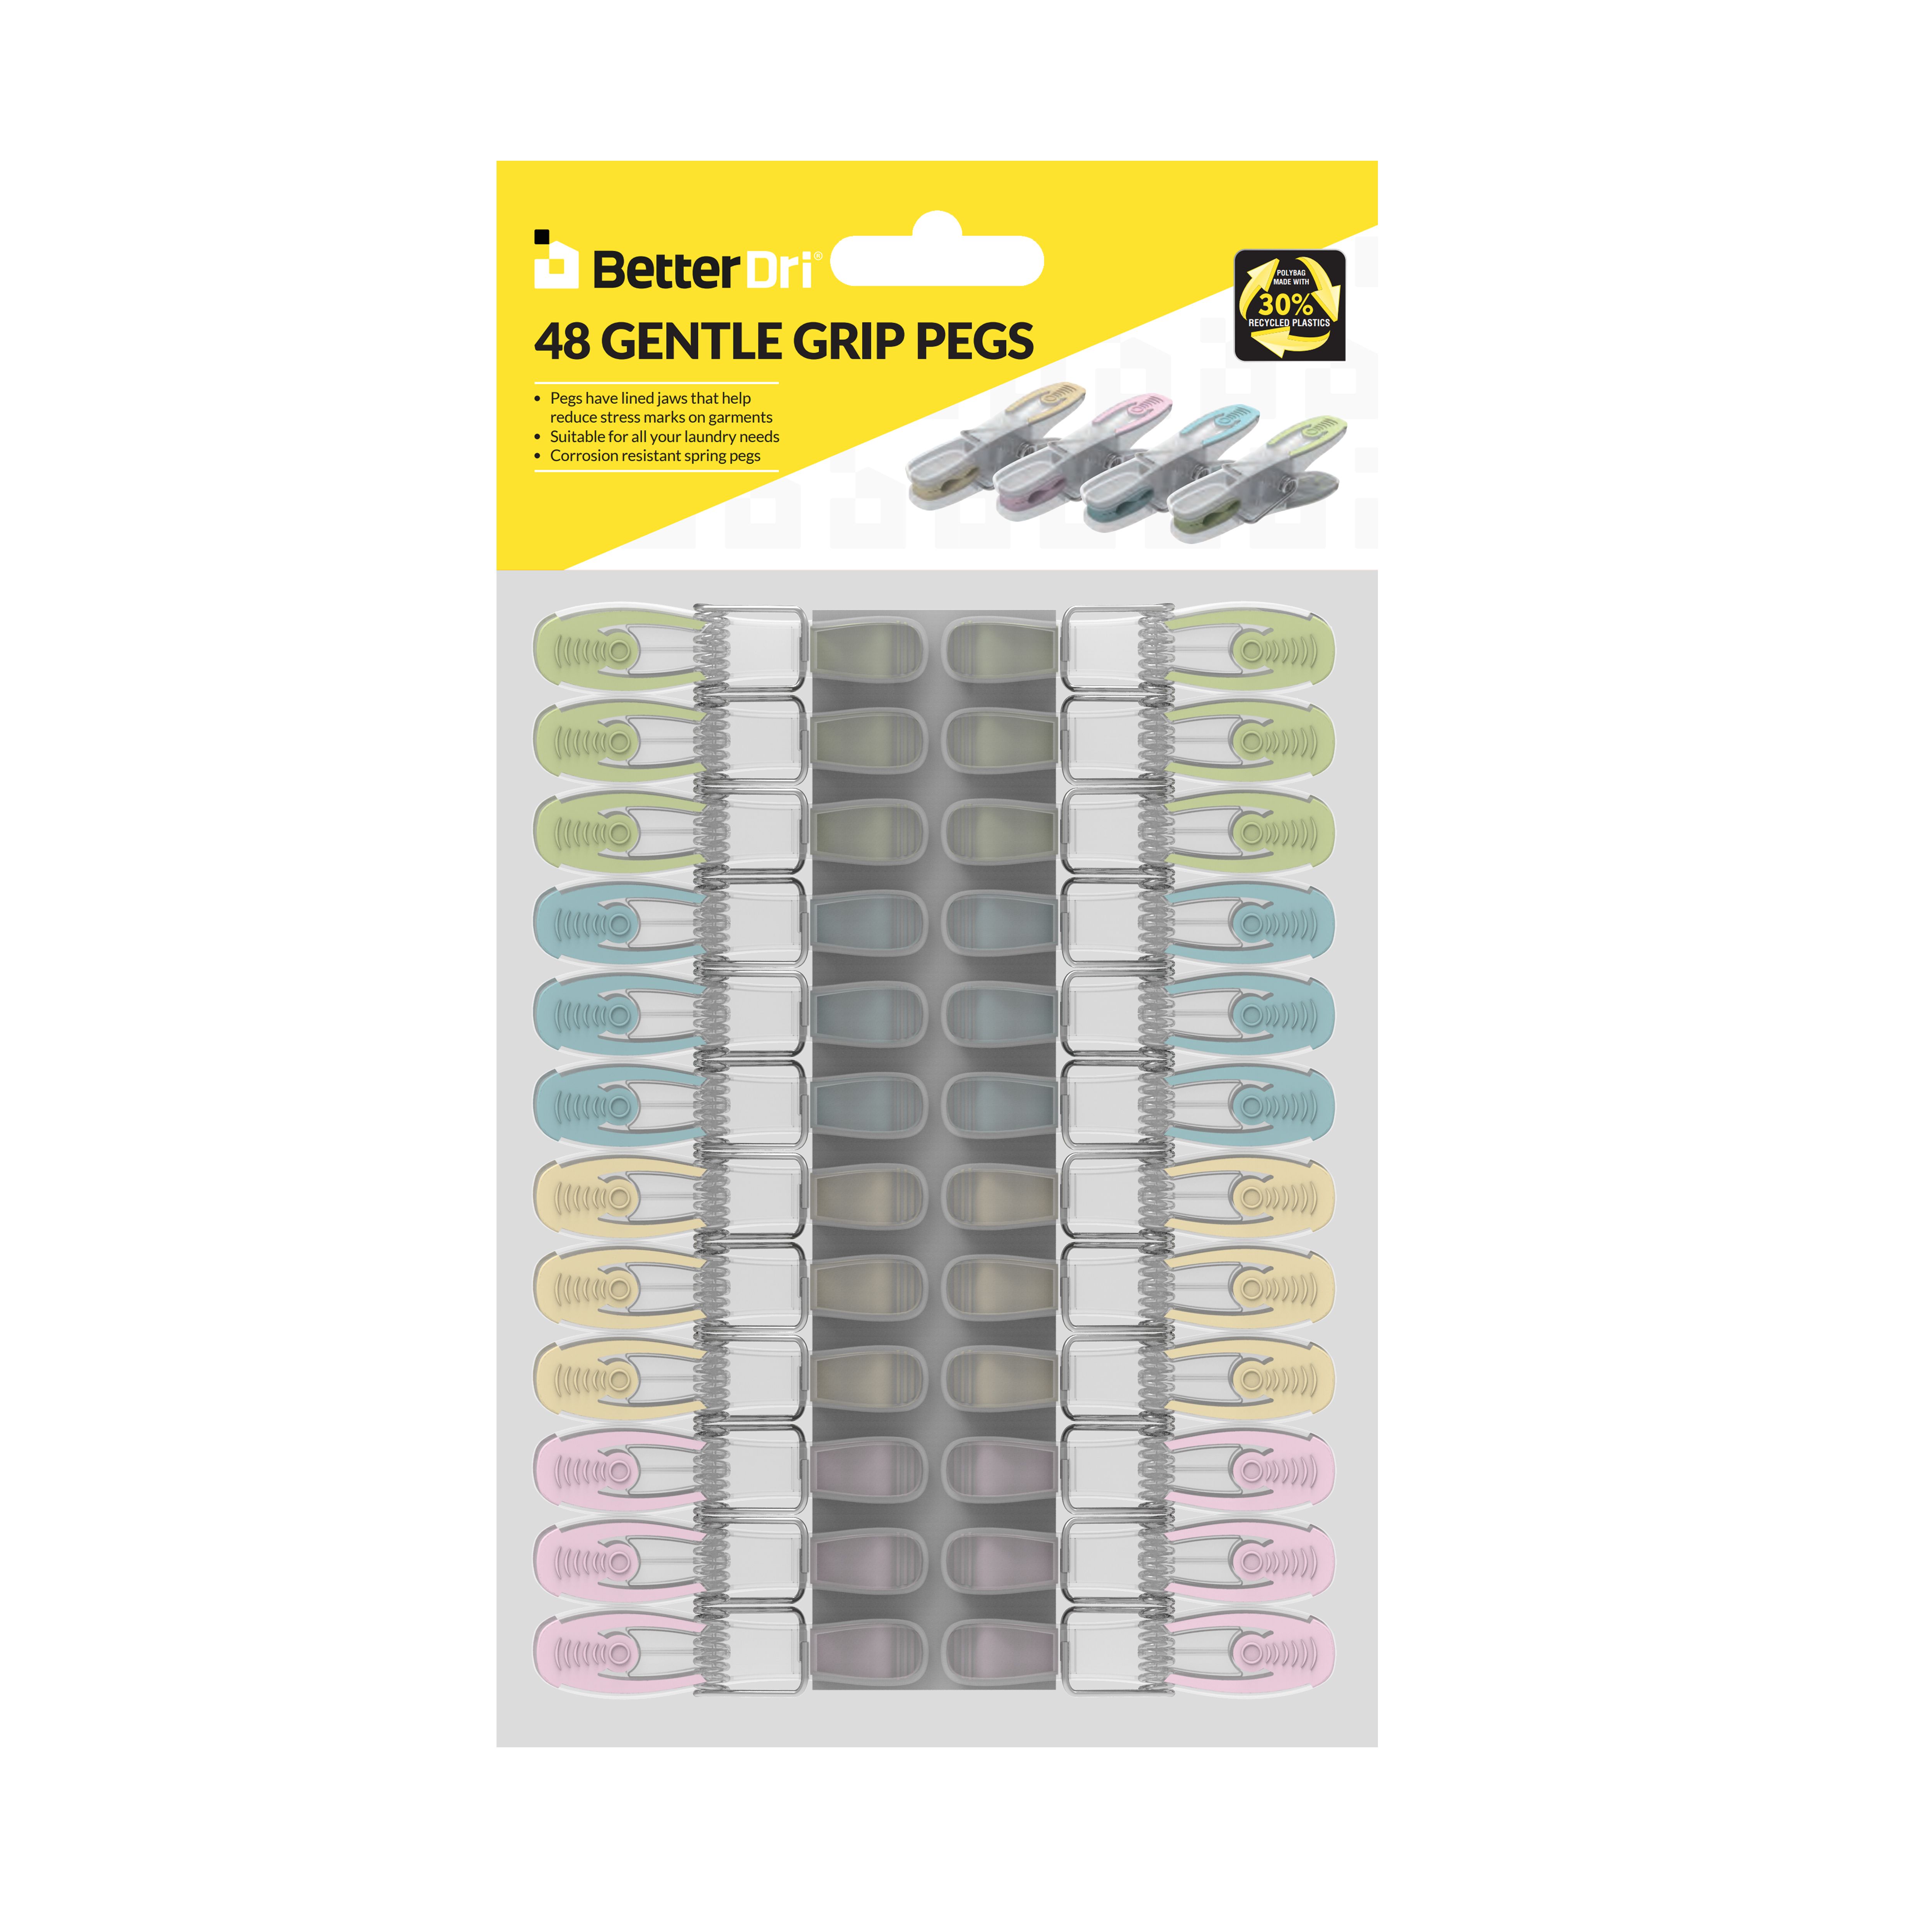 BetterDri Gentle-grip Plastic Clothes pegs, Pack of 48